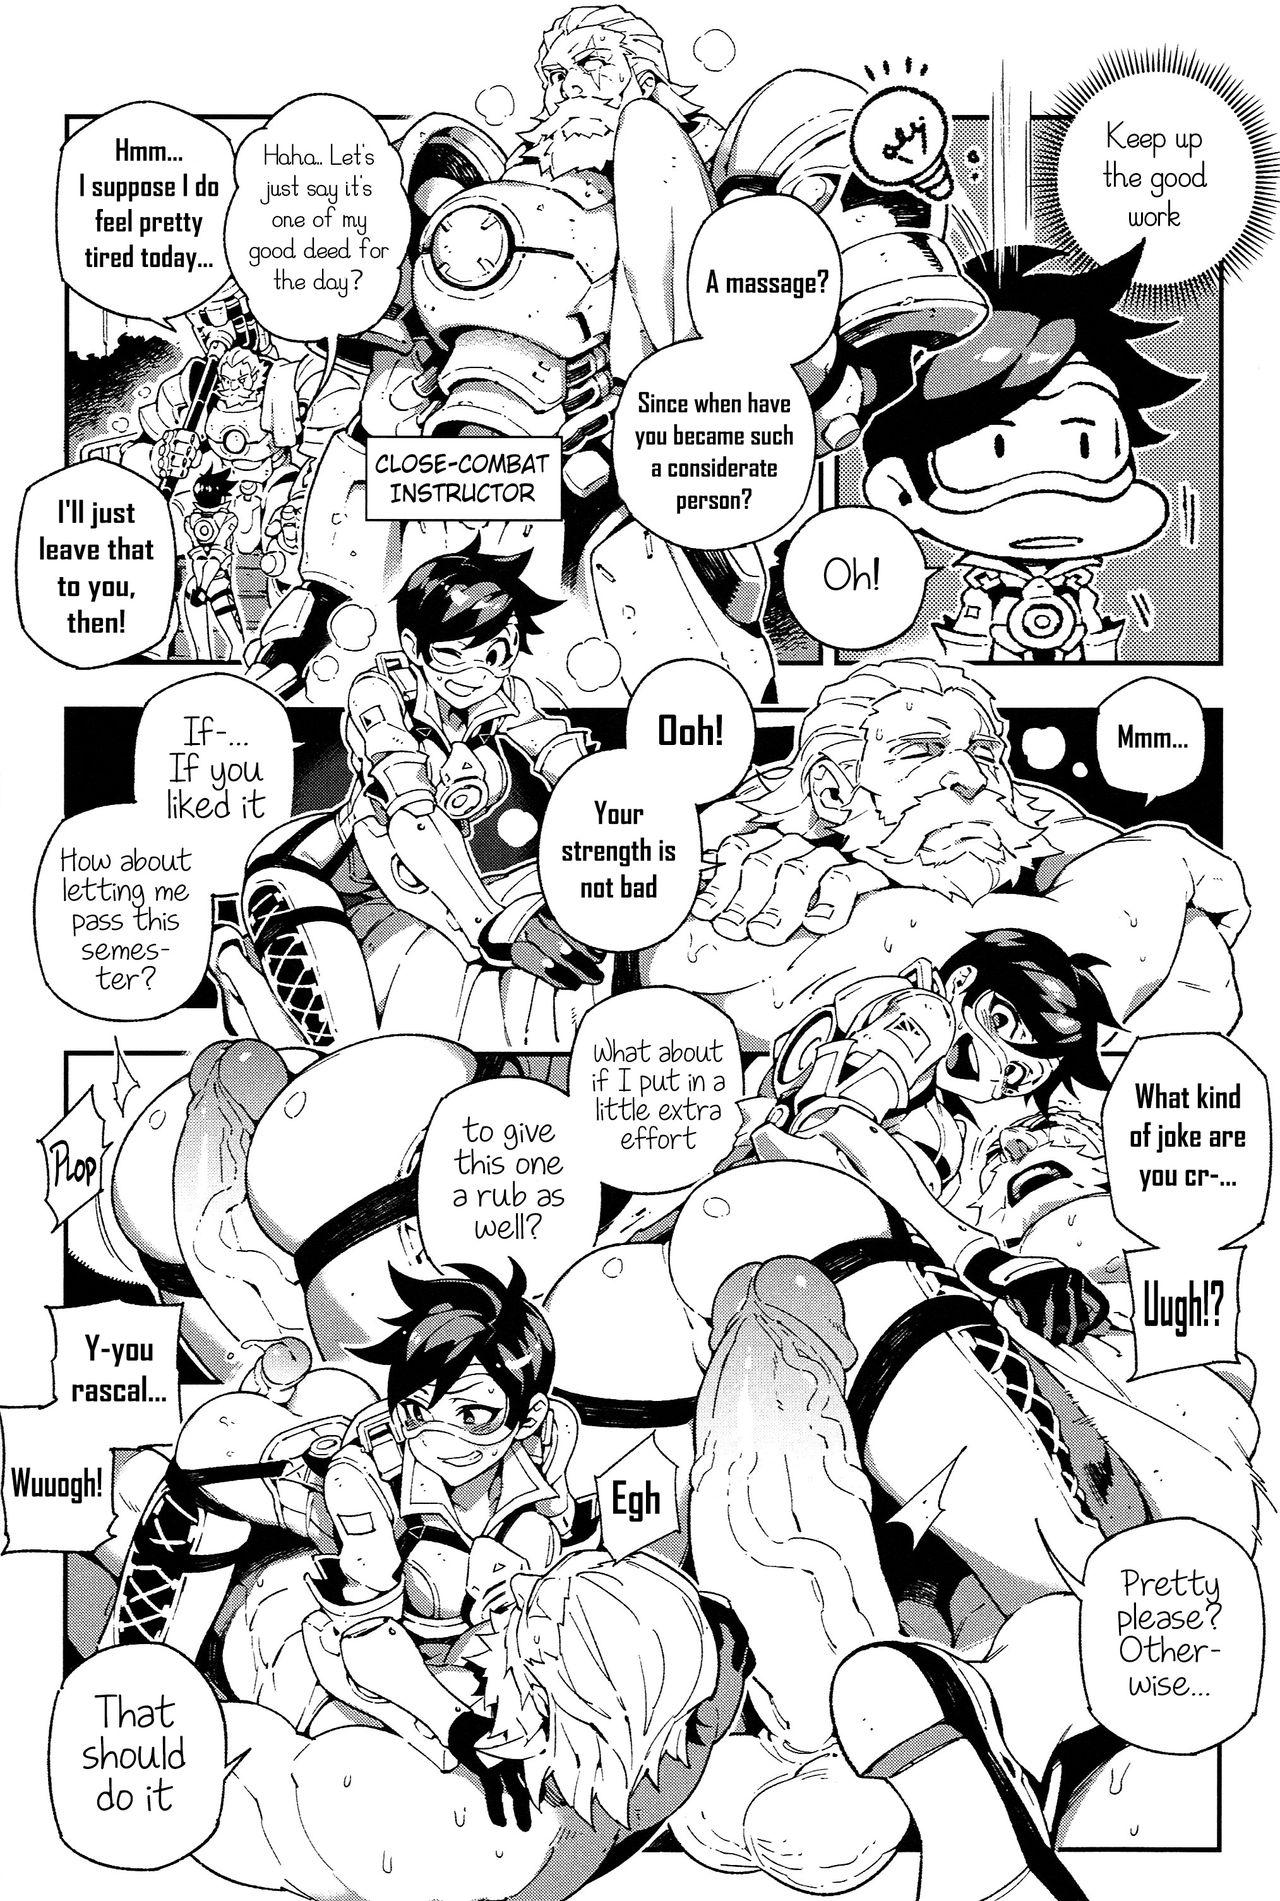 Small Boobs OVERTIME!! OVERWATCH FANBOOK VOL.1 - Overwatch Tight Pussy Fucked - Page 7